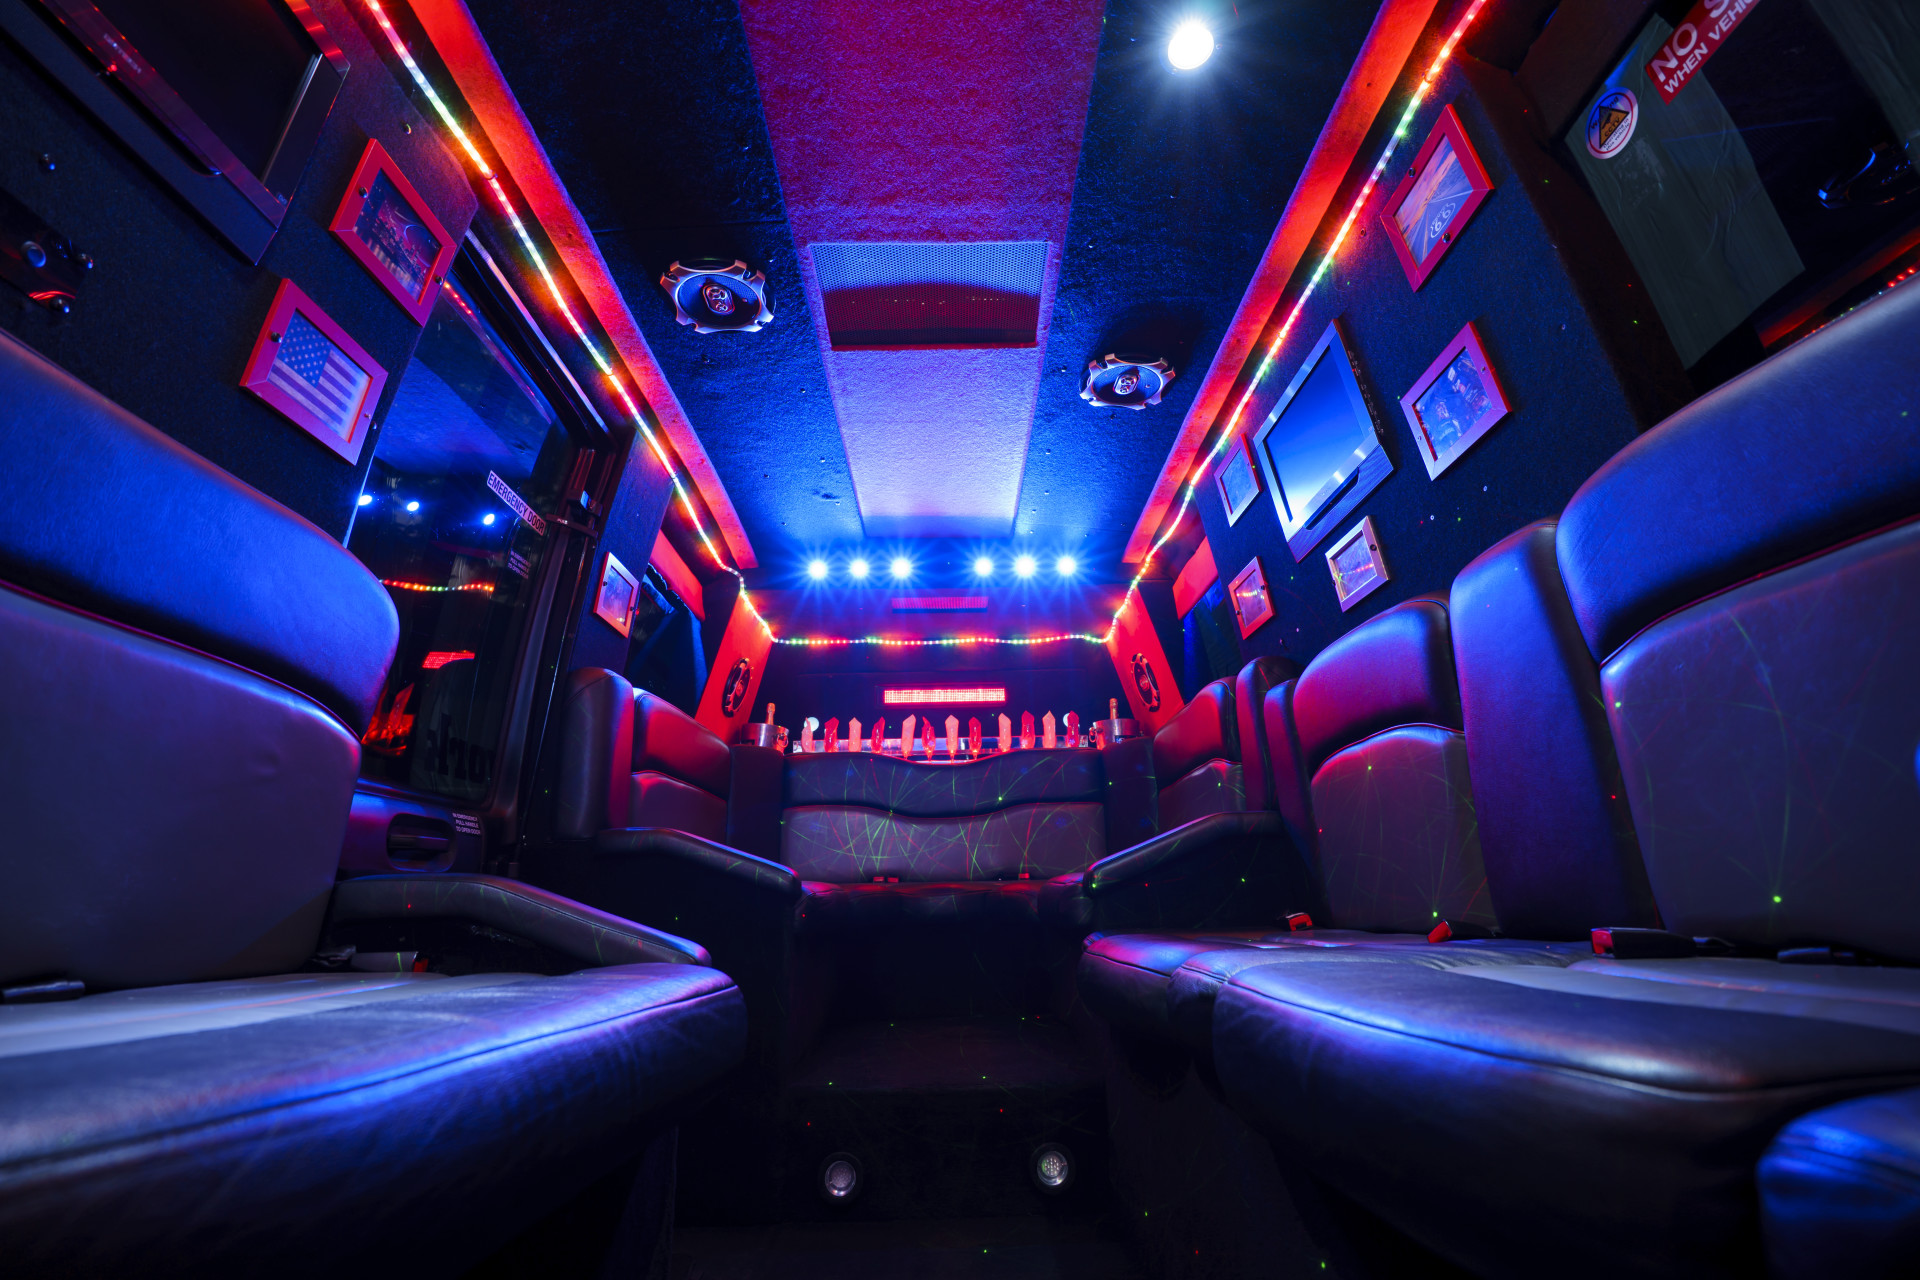 Party Bus Hire for the EFL Championship play-offs in Wembley